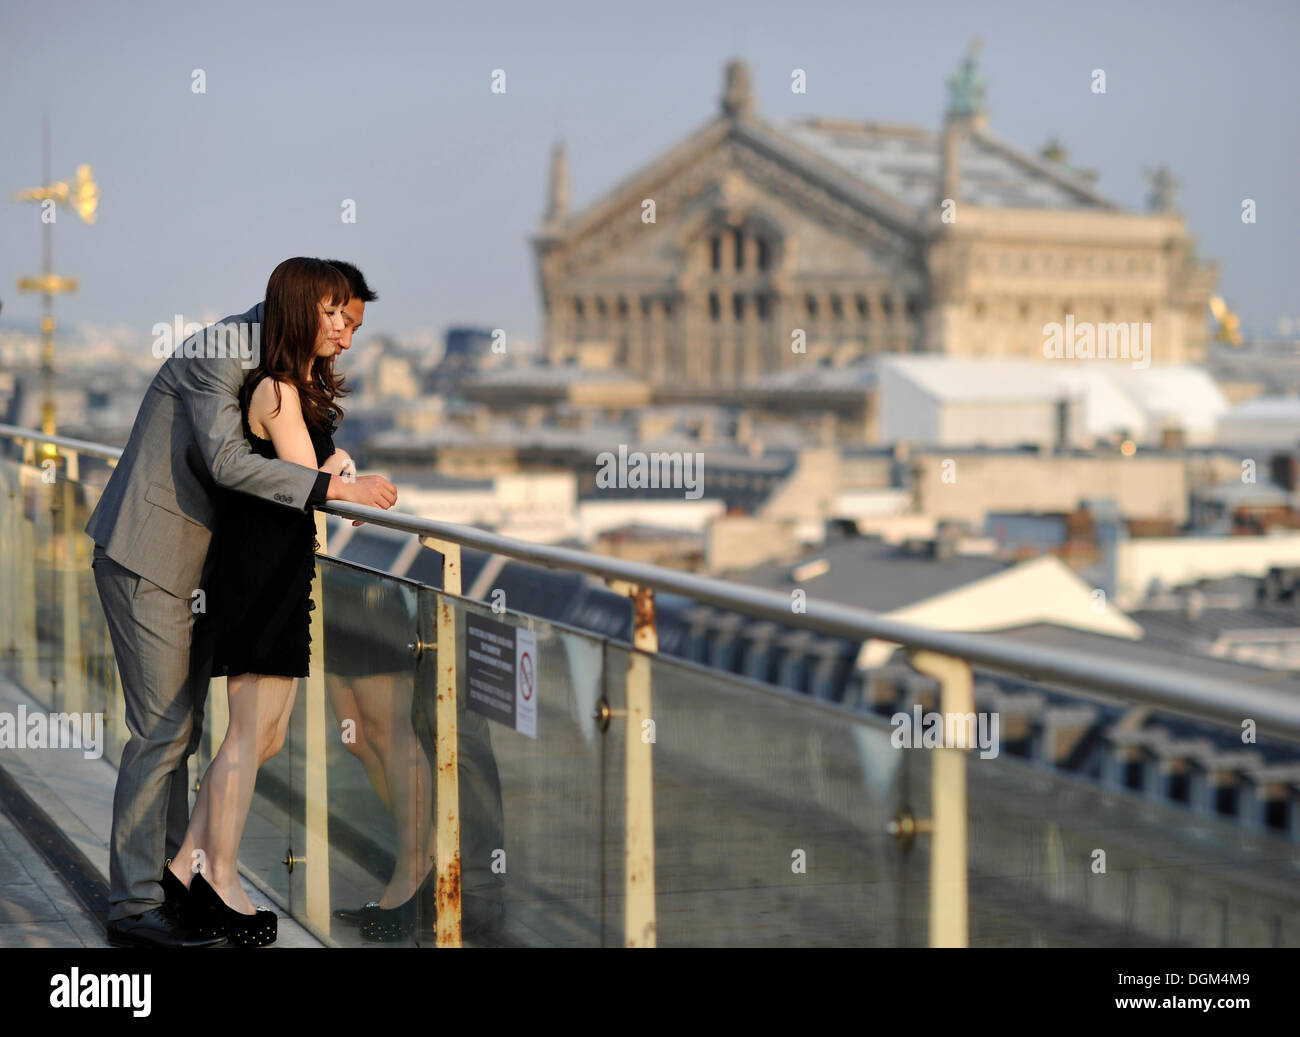 Couple and view from a viewing platform on the Opéra Palais Garnier opera house, Paris, France, Europe Stock Photo